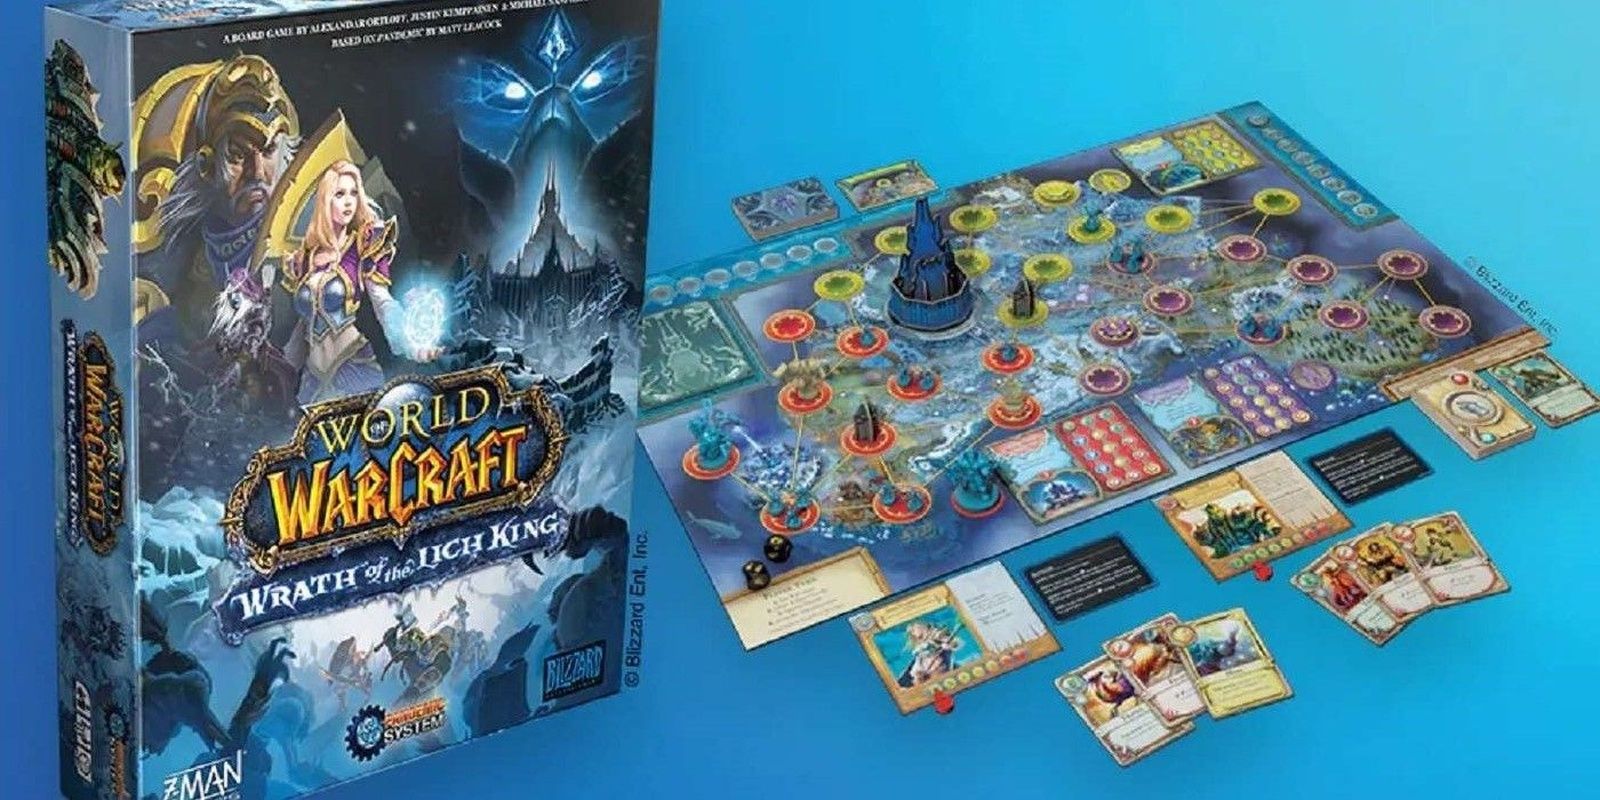 The box and componentsfor World of Warcraft: Wrath of the Lich King board game.